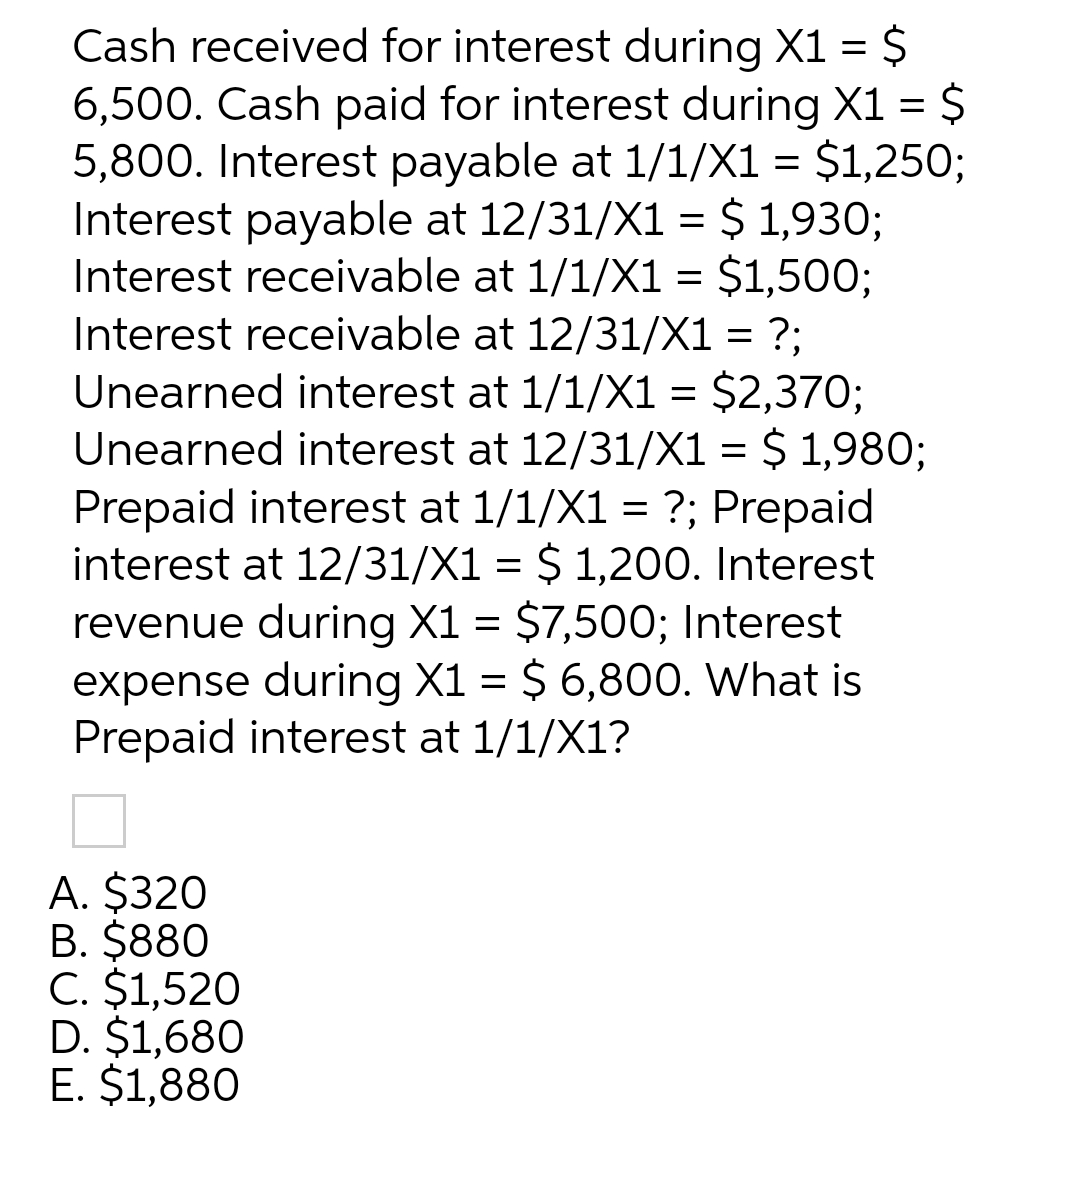 Cash received for interest during X1 = $
6,500. Cash paid for interest during X1 = $
5,800. Interest payable at 1/1/X1 = $1,250;
Interest payable at 12/31/X1 = $ 1,930;
Interest receivable at 1/1/X1 = $1,500;
Interest receivable at 12/31/X1 = ?;
Unearned interest at 1/1/X1 = $2,370;
Unearned interest at 12/31/X1 = $ 1,980;
Prepaid interest at 1/1/X1 = ?; Prepaid
interest at 12/31/X1 = $ 1,200. Interest
revenue during X1 = $7,500; Interest
expense during X1 = $ 6,800. What is
Prepaid interest at 1/1/X1?
A. $320
B. $880
C. $1,520
D. $1,680
E. $1,880